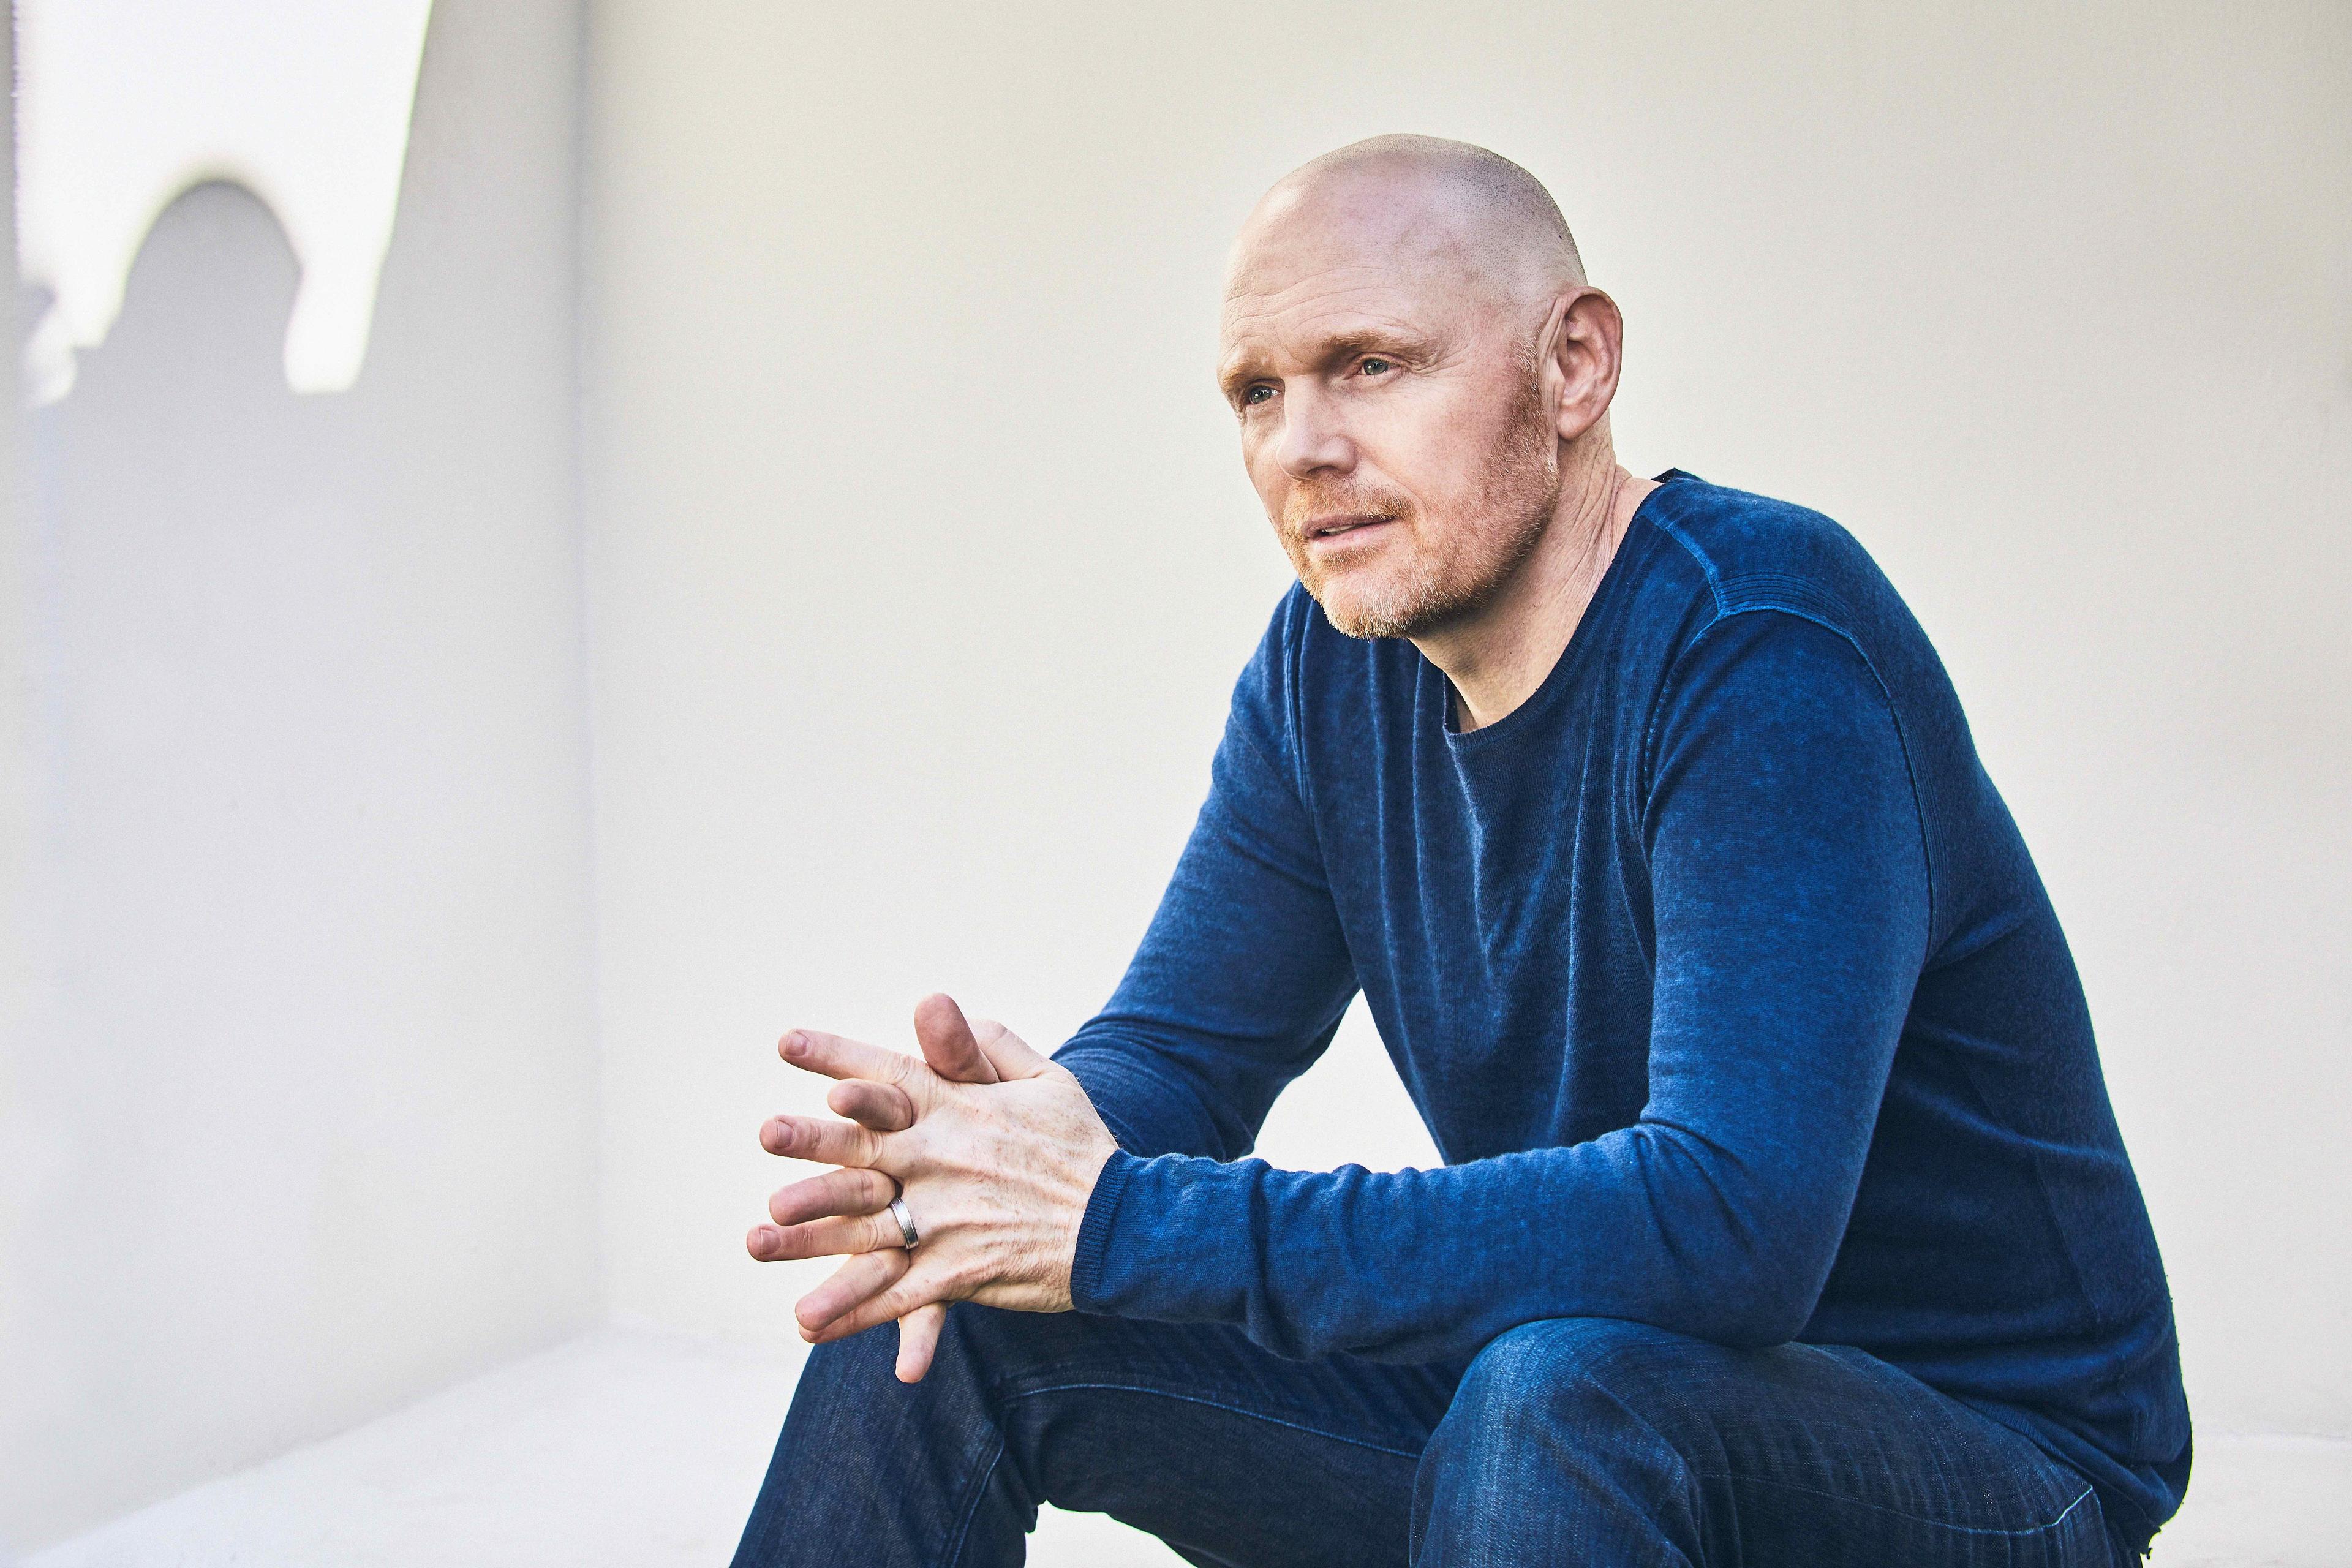 Have a laugh with American comedian Bill Burr in Abu Dhabi